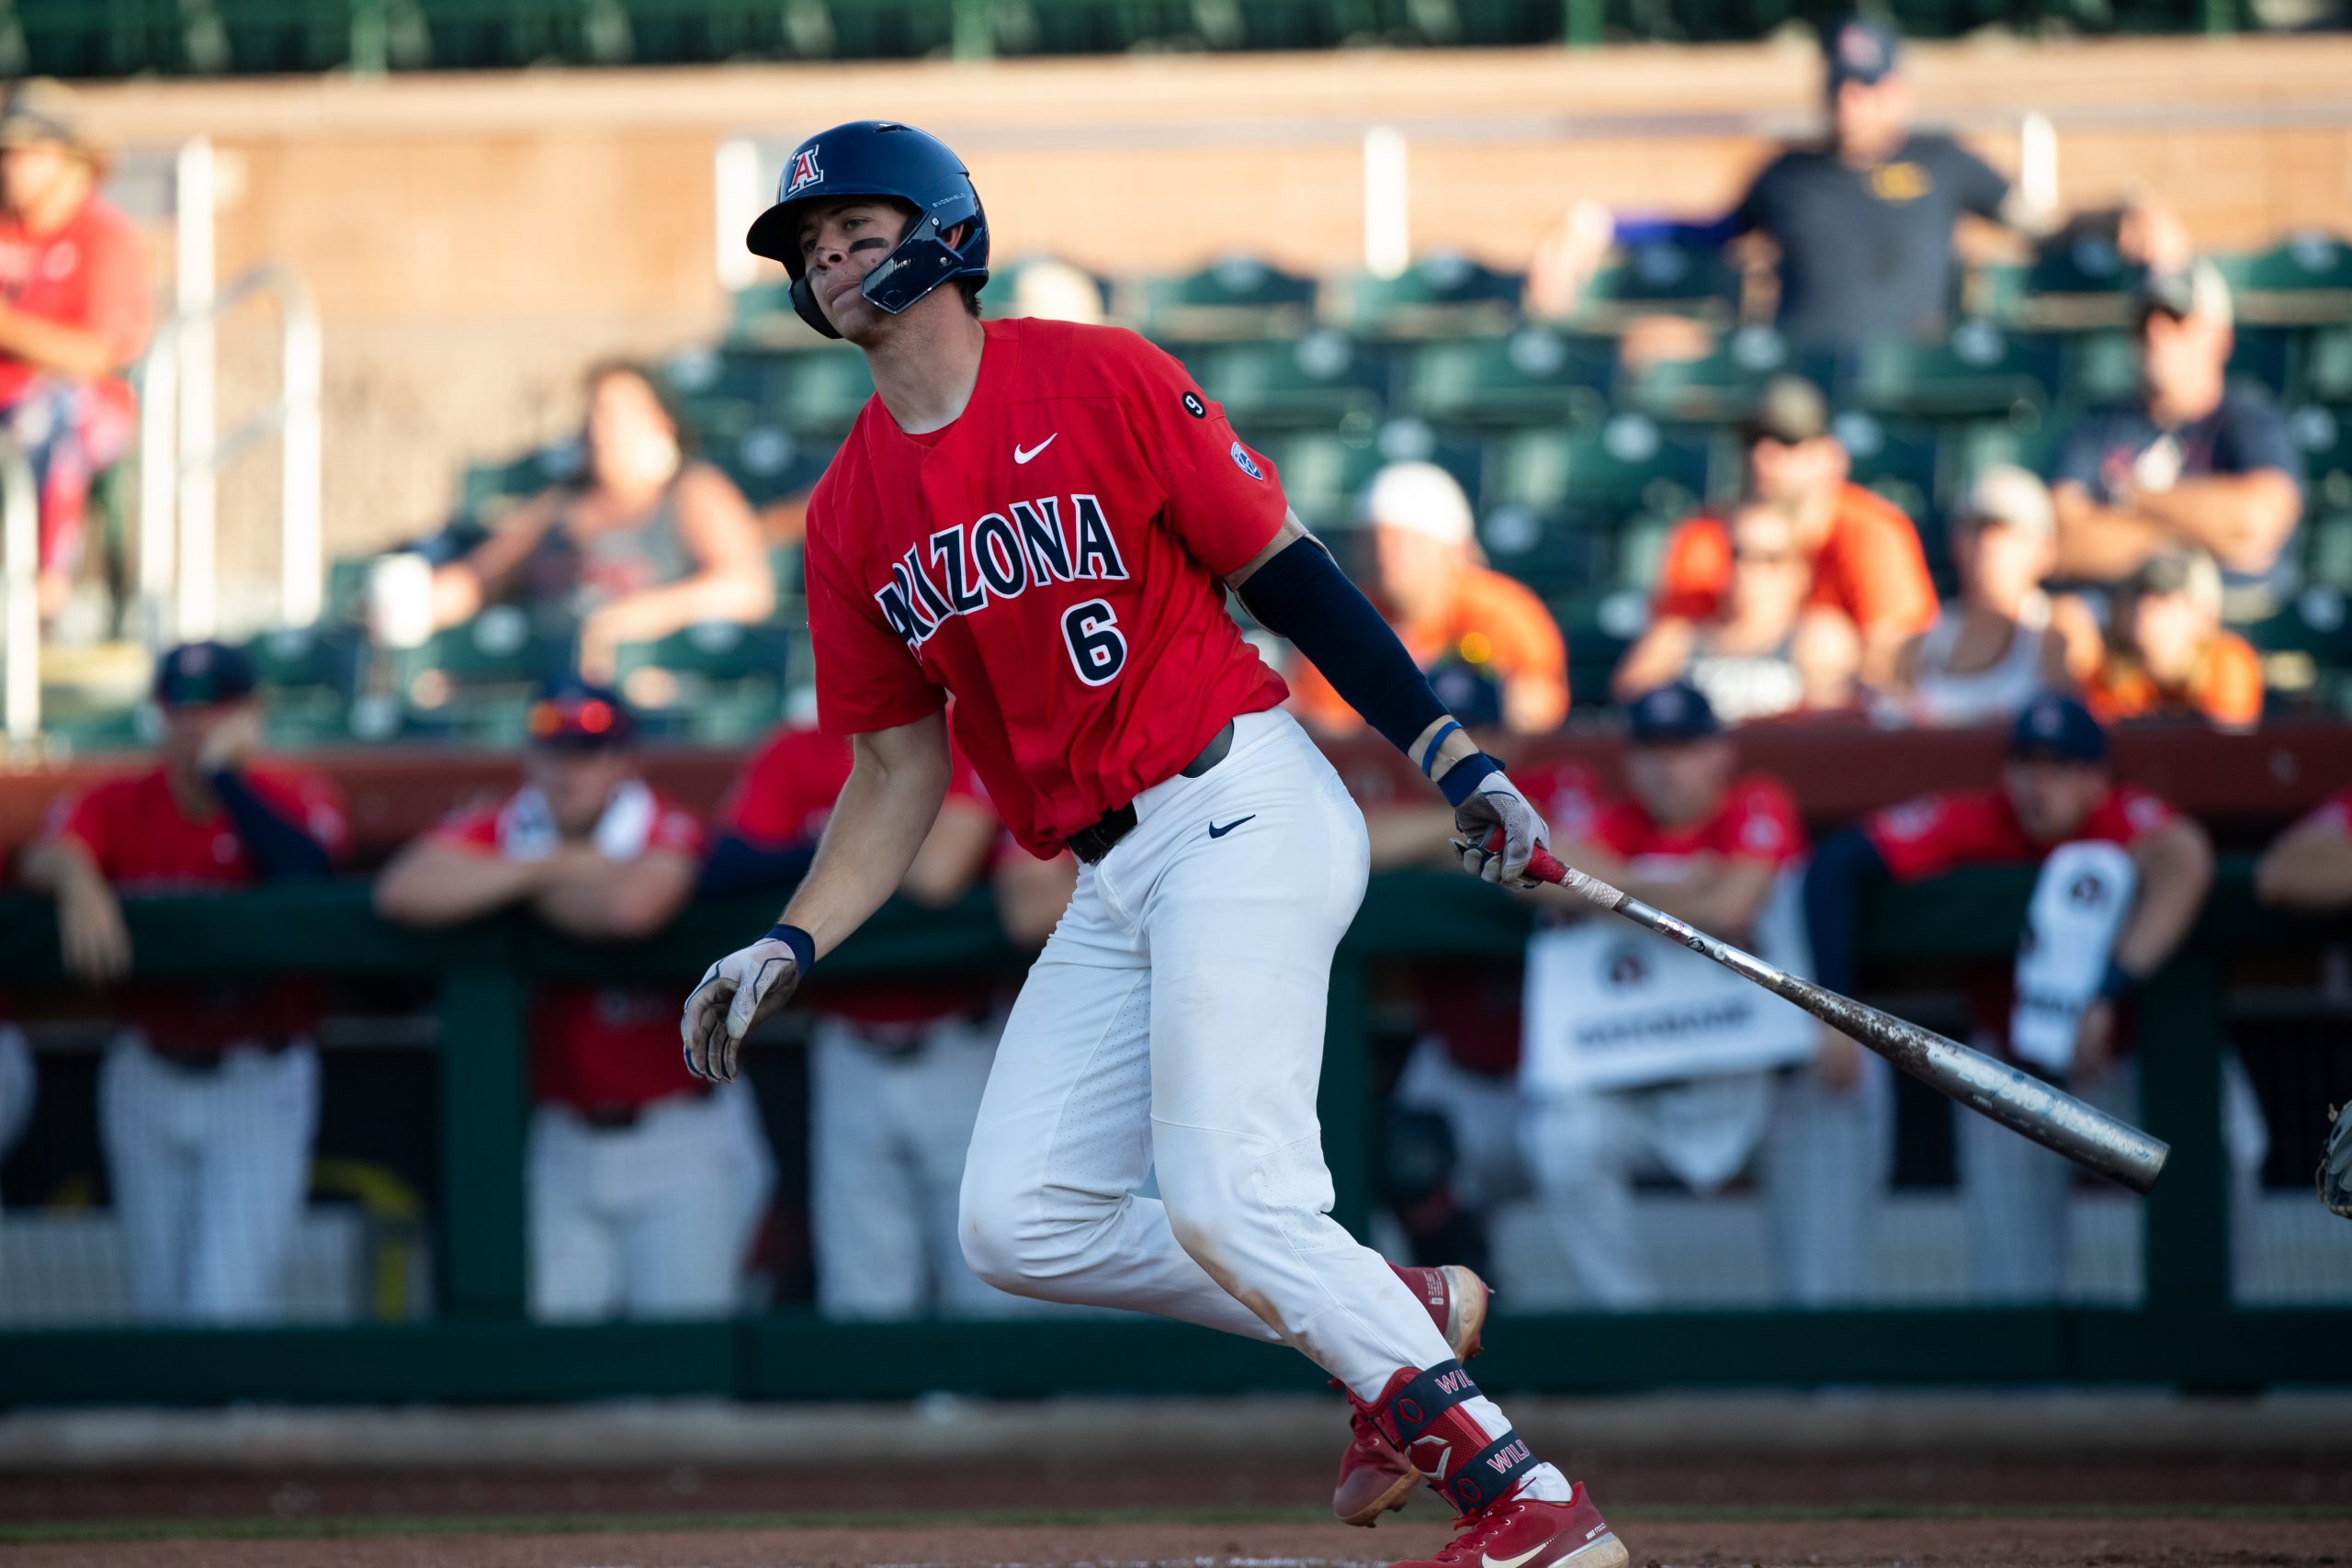 Arizona Wildcats Catcher Daniel Susac (6) hits a foul ball down the third base line during the PAC1...